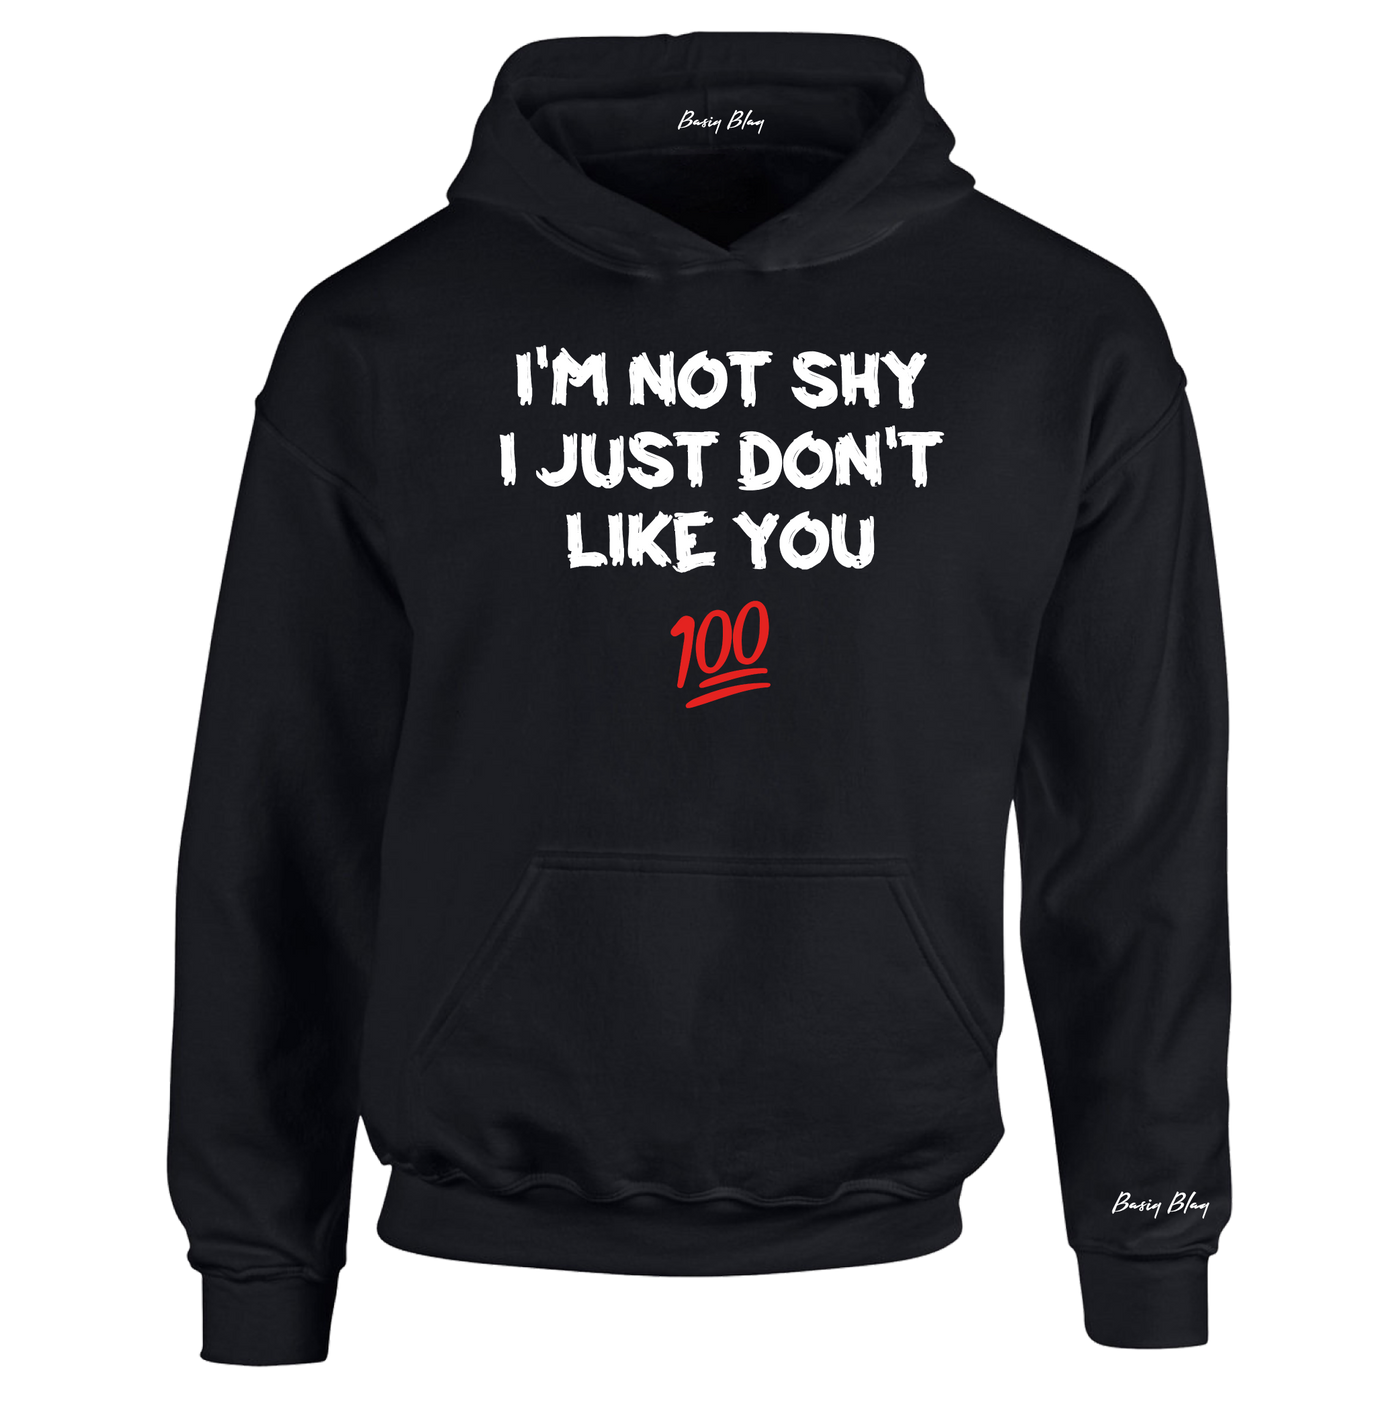 I'M NOT SHY I JUST DON'T LIKE YOU UNISEX HOODIE